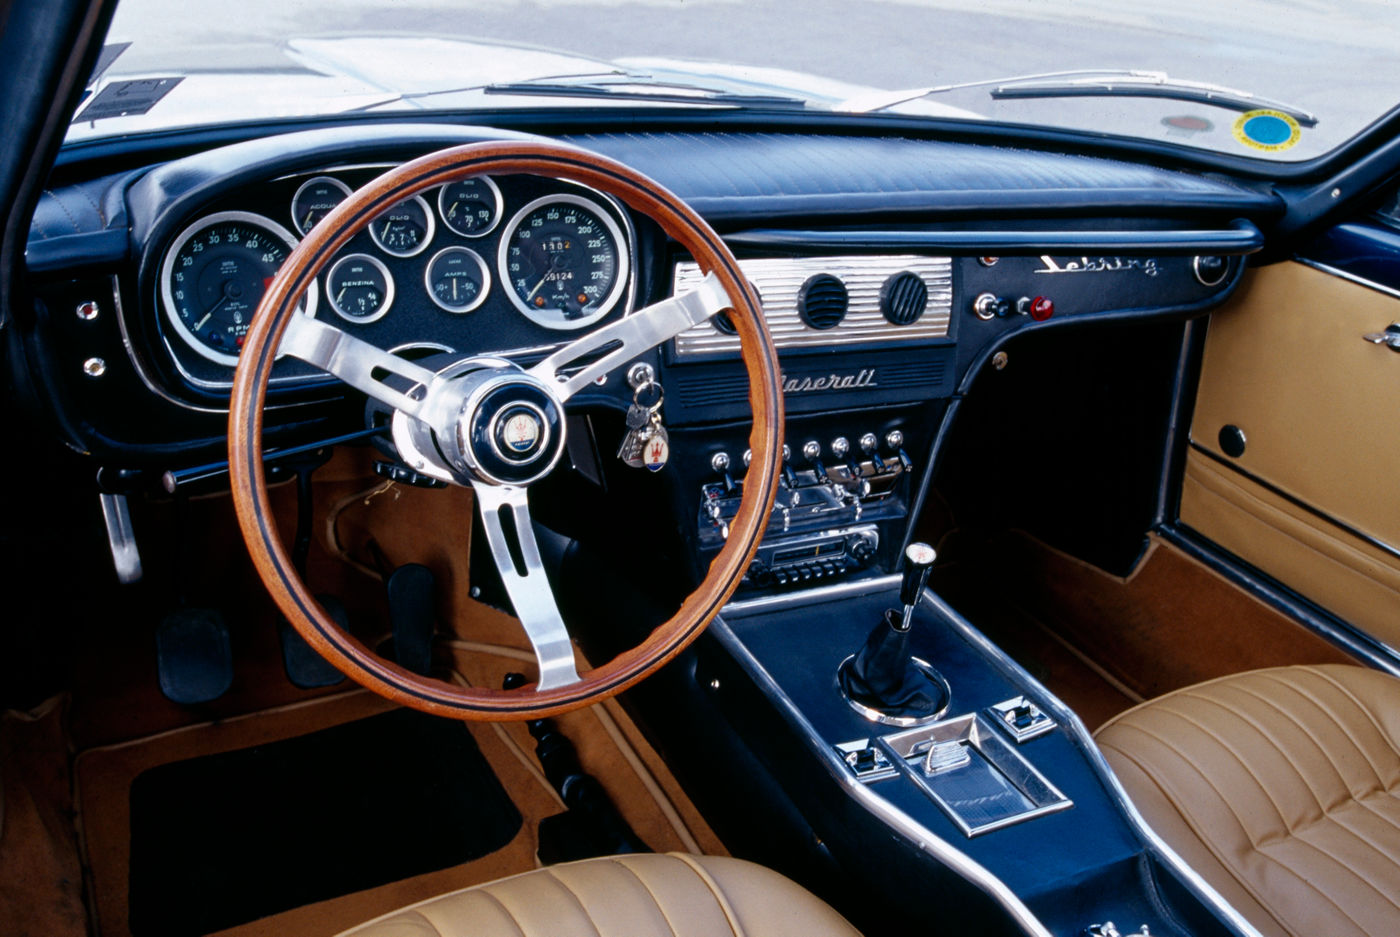 1962 Maserati Sebring - First Series - interior view of the classic car model